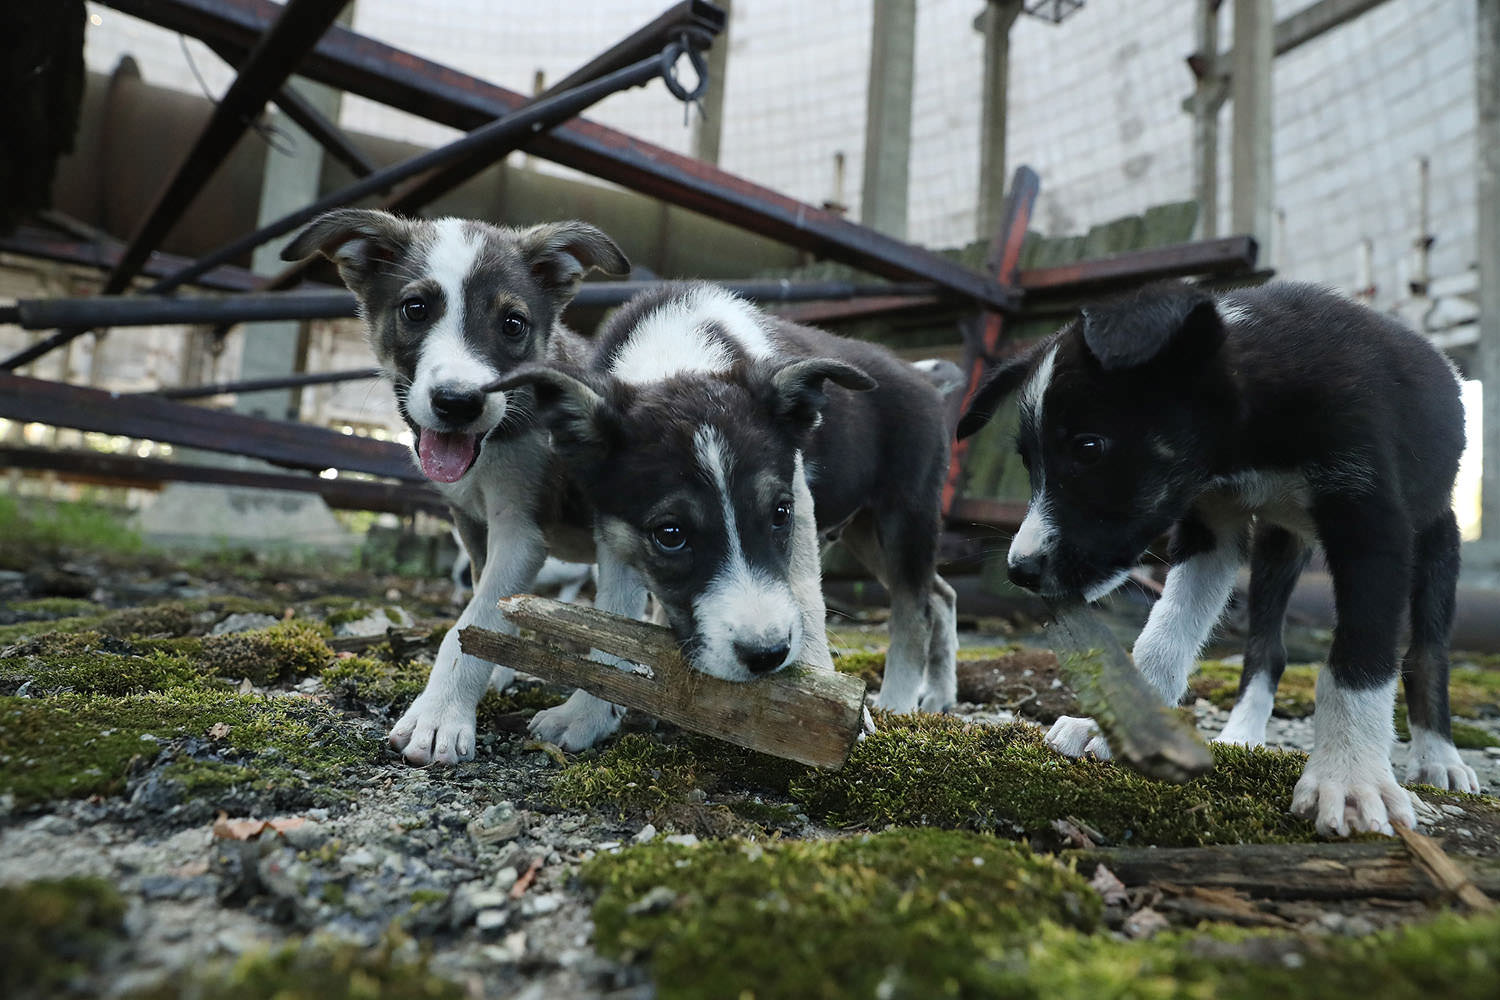 chernobyl puppies and dogs